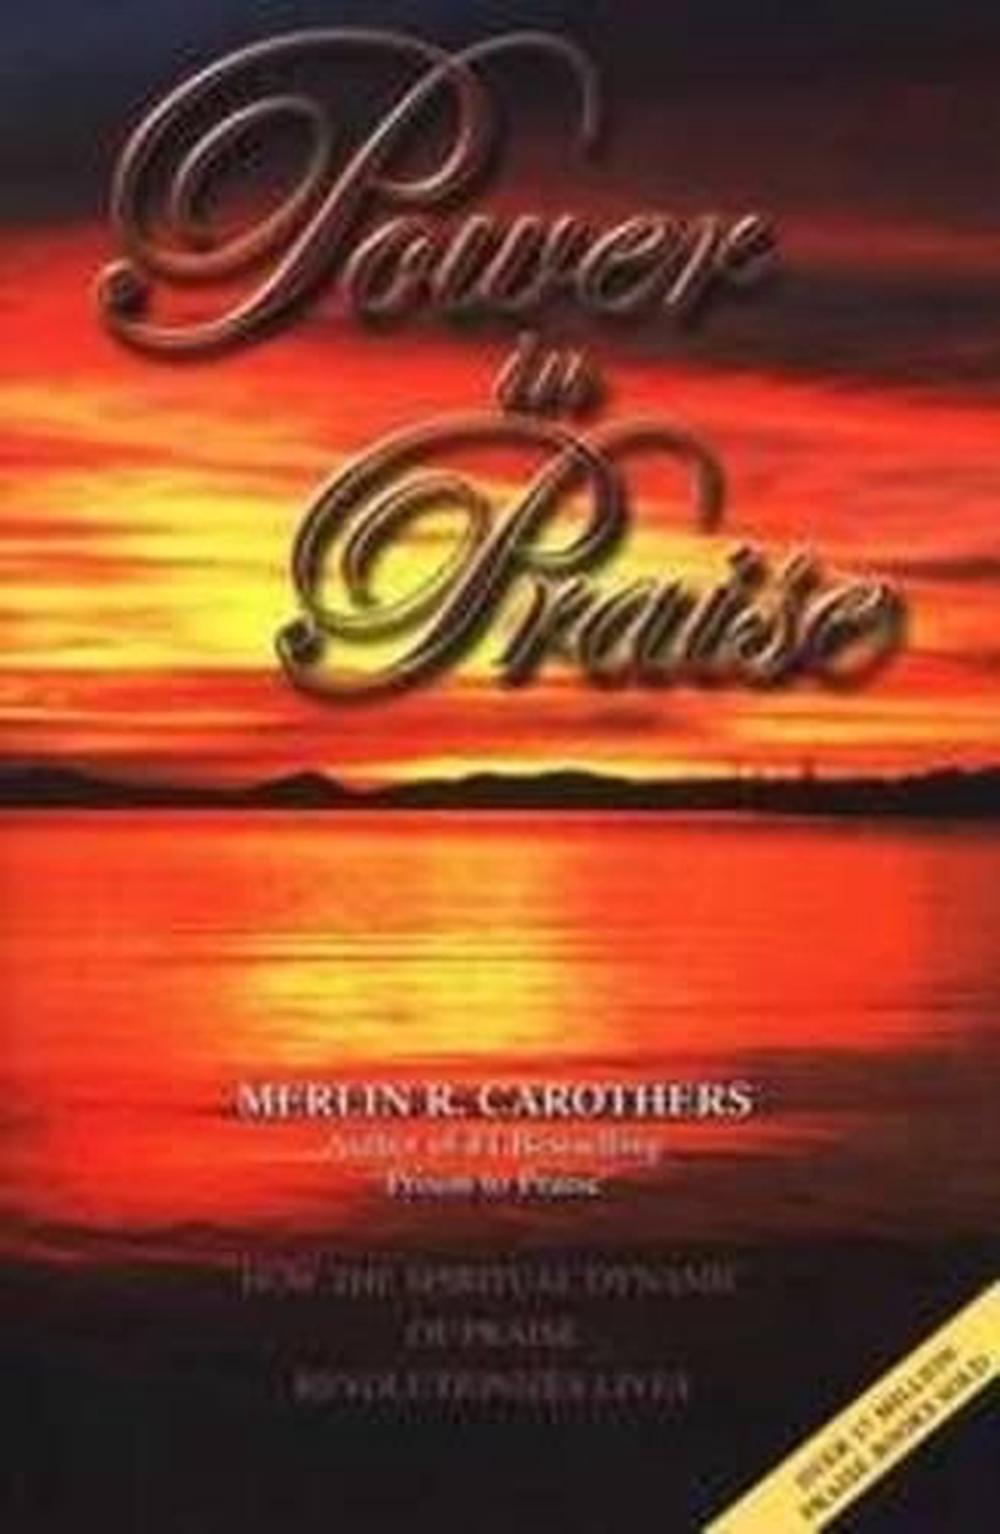 Power in Praise by Merlin R. Carothers (English) Paperback Book Free Shipping! 9780943026015 eBay